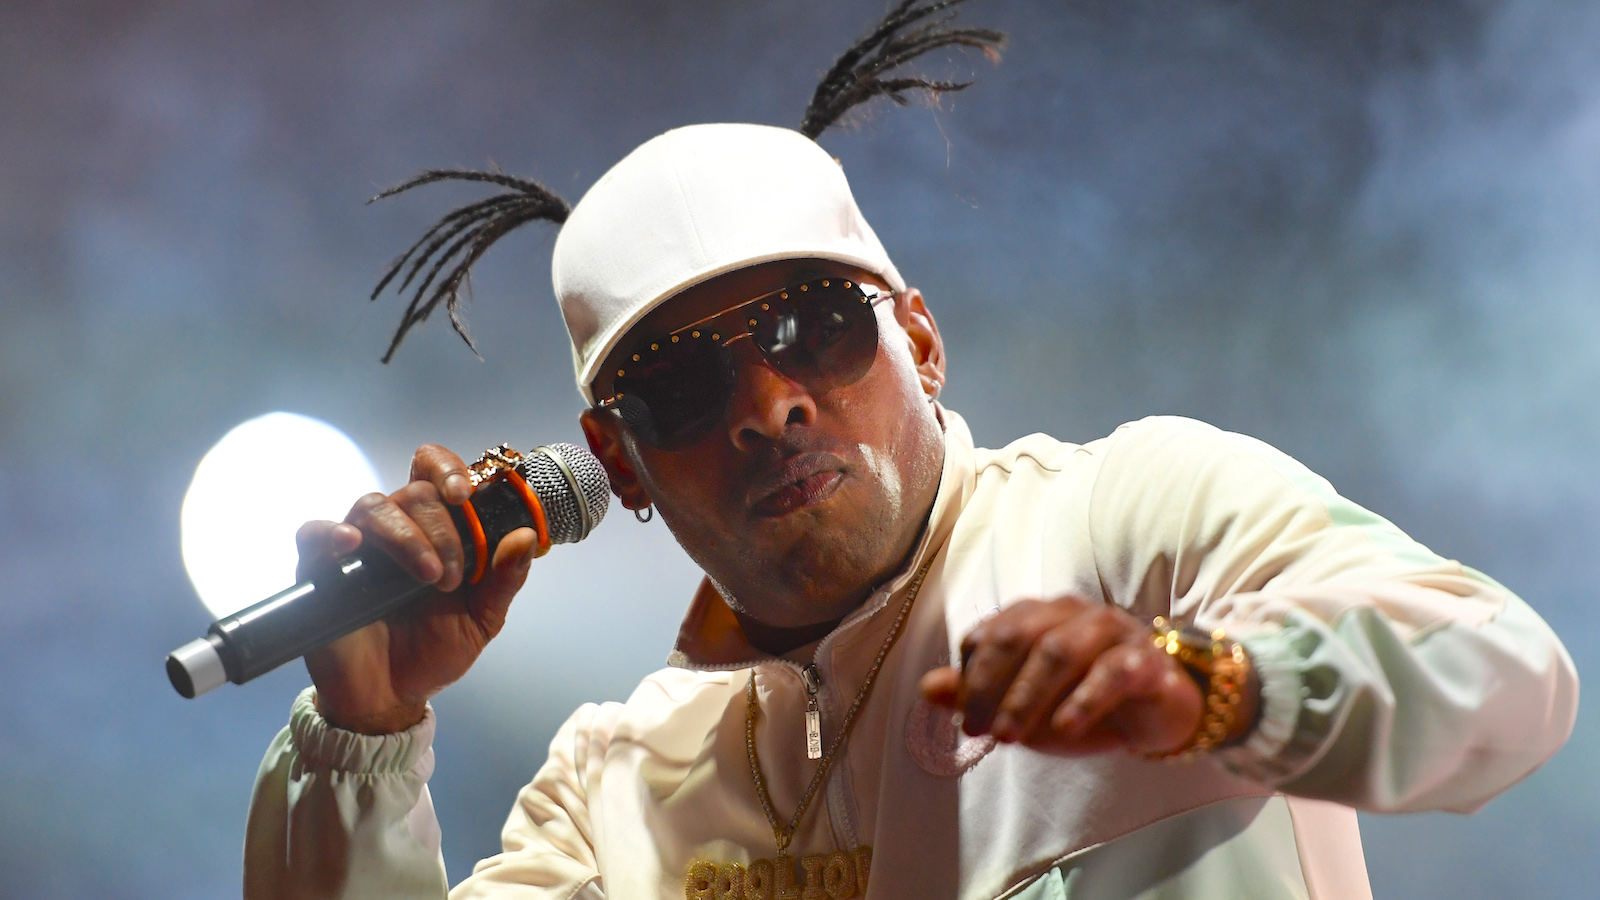 Coolio's performance in 2019